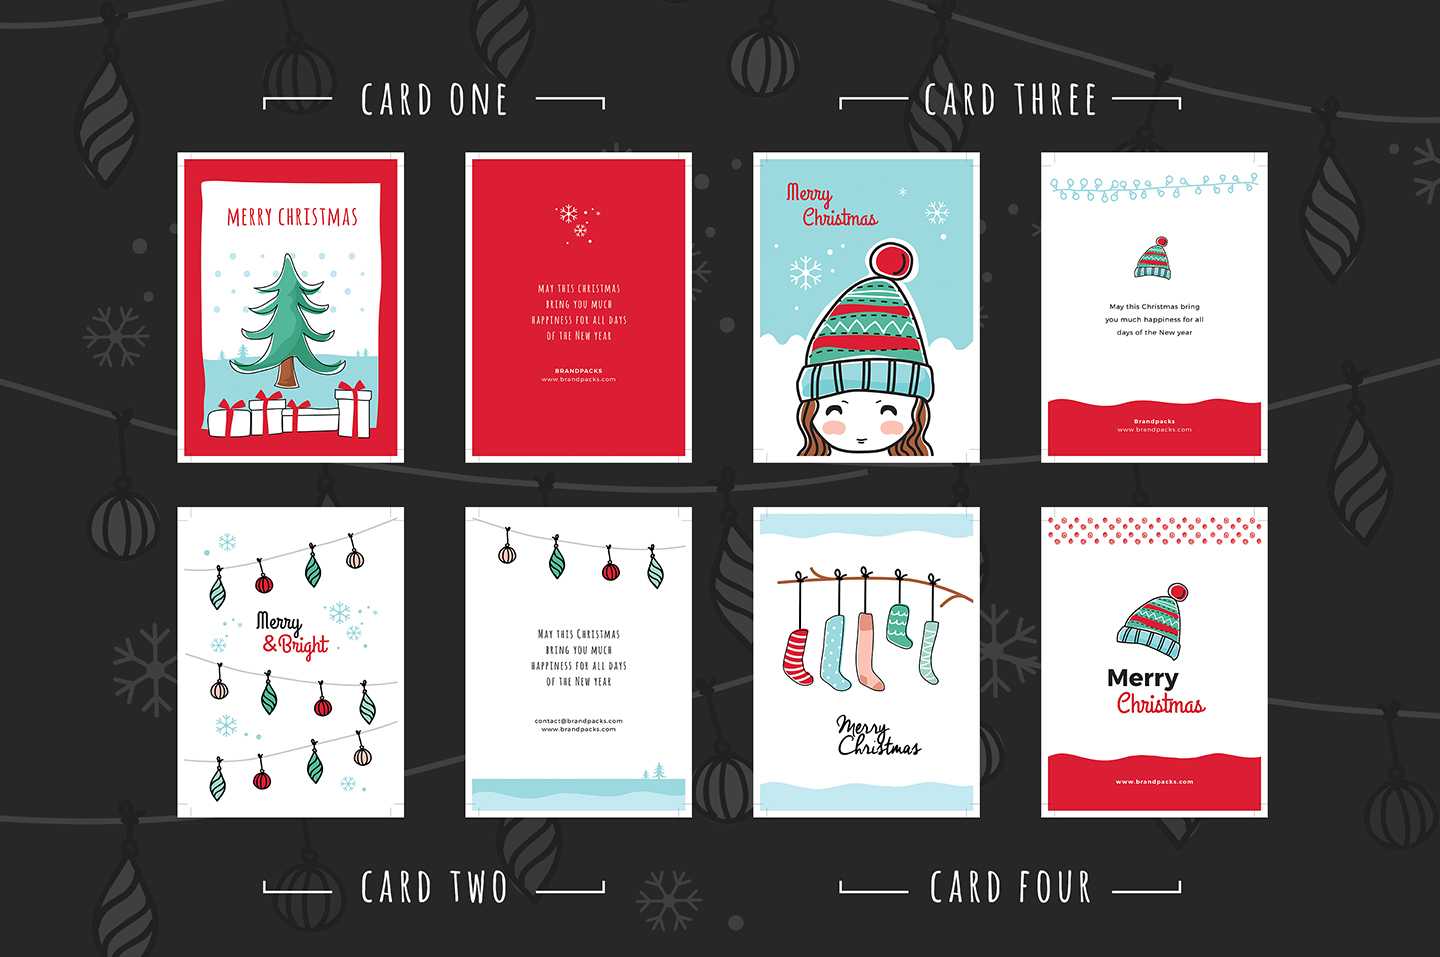 Free Christmas Card Templates For Photoshop & Illustrator Within Free Christmas Card Templates For Photoshop